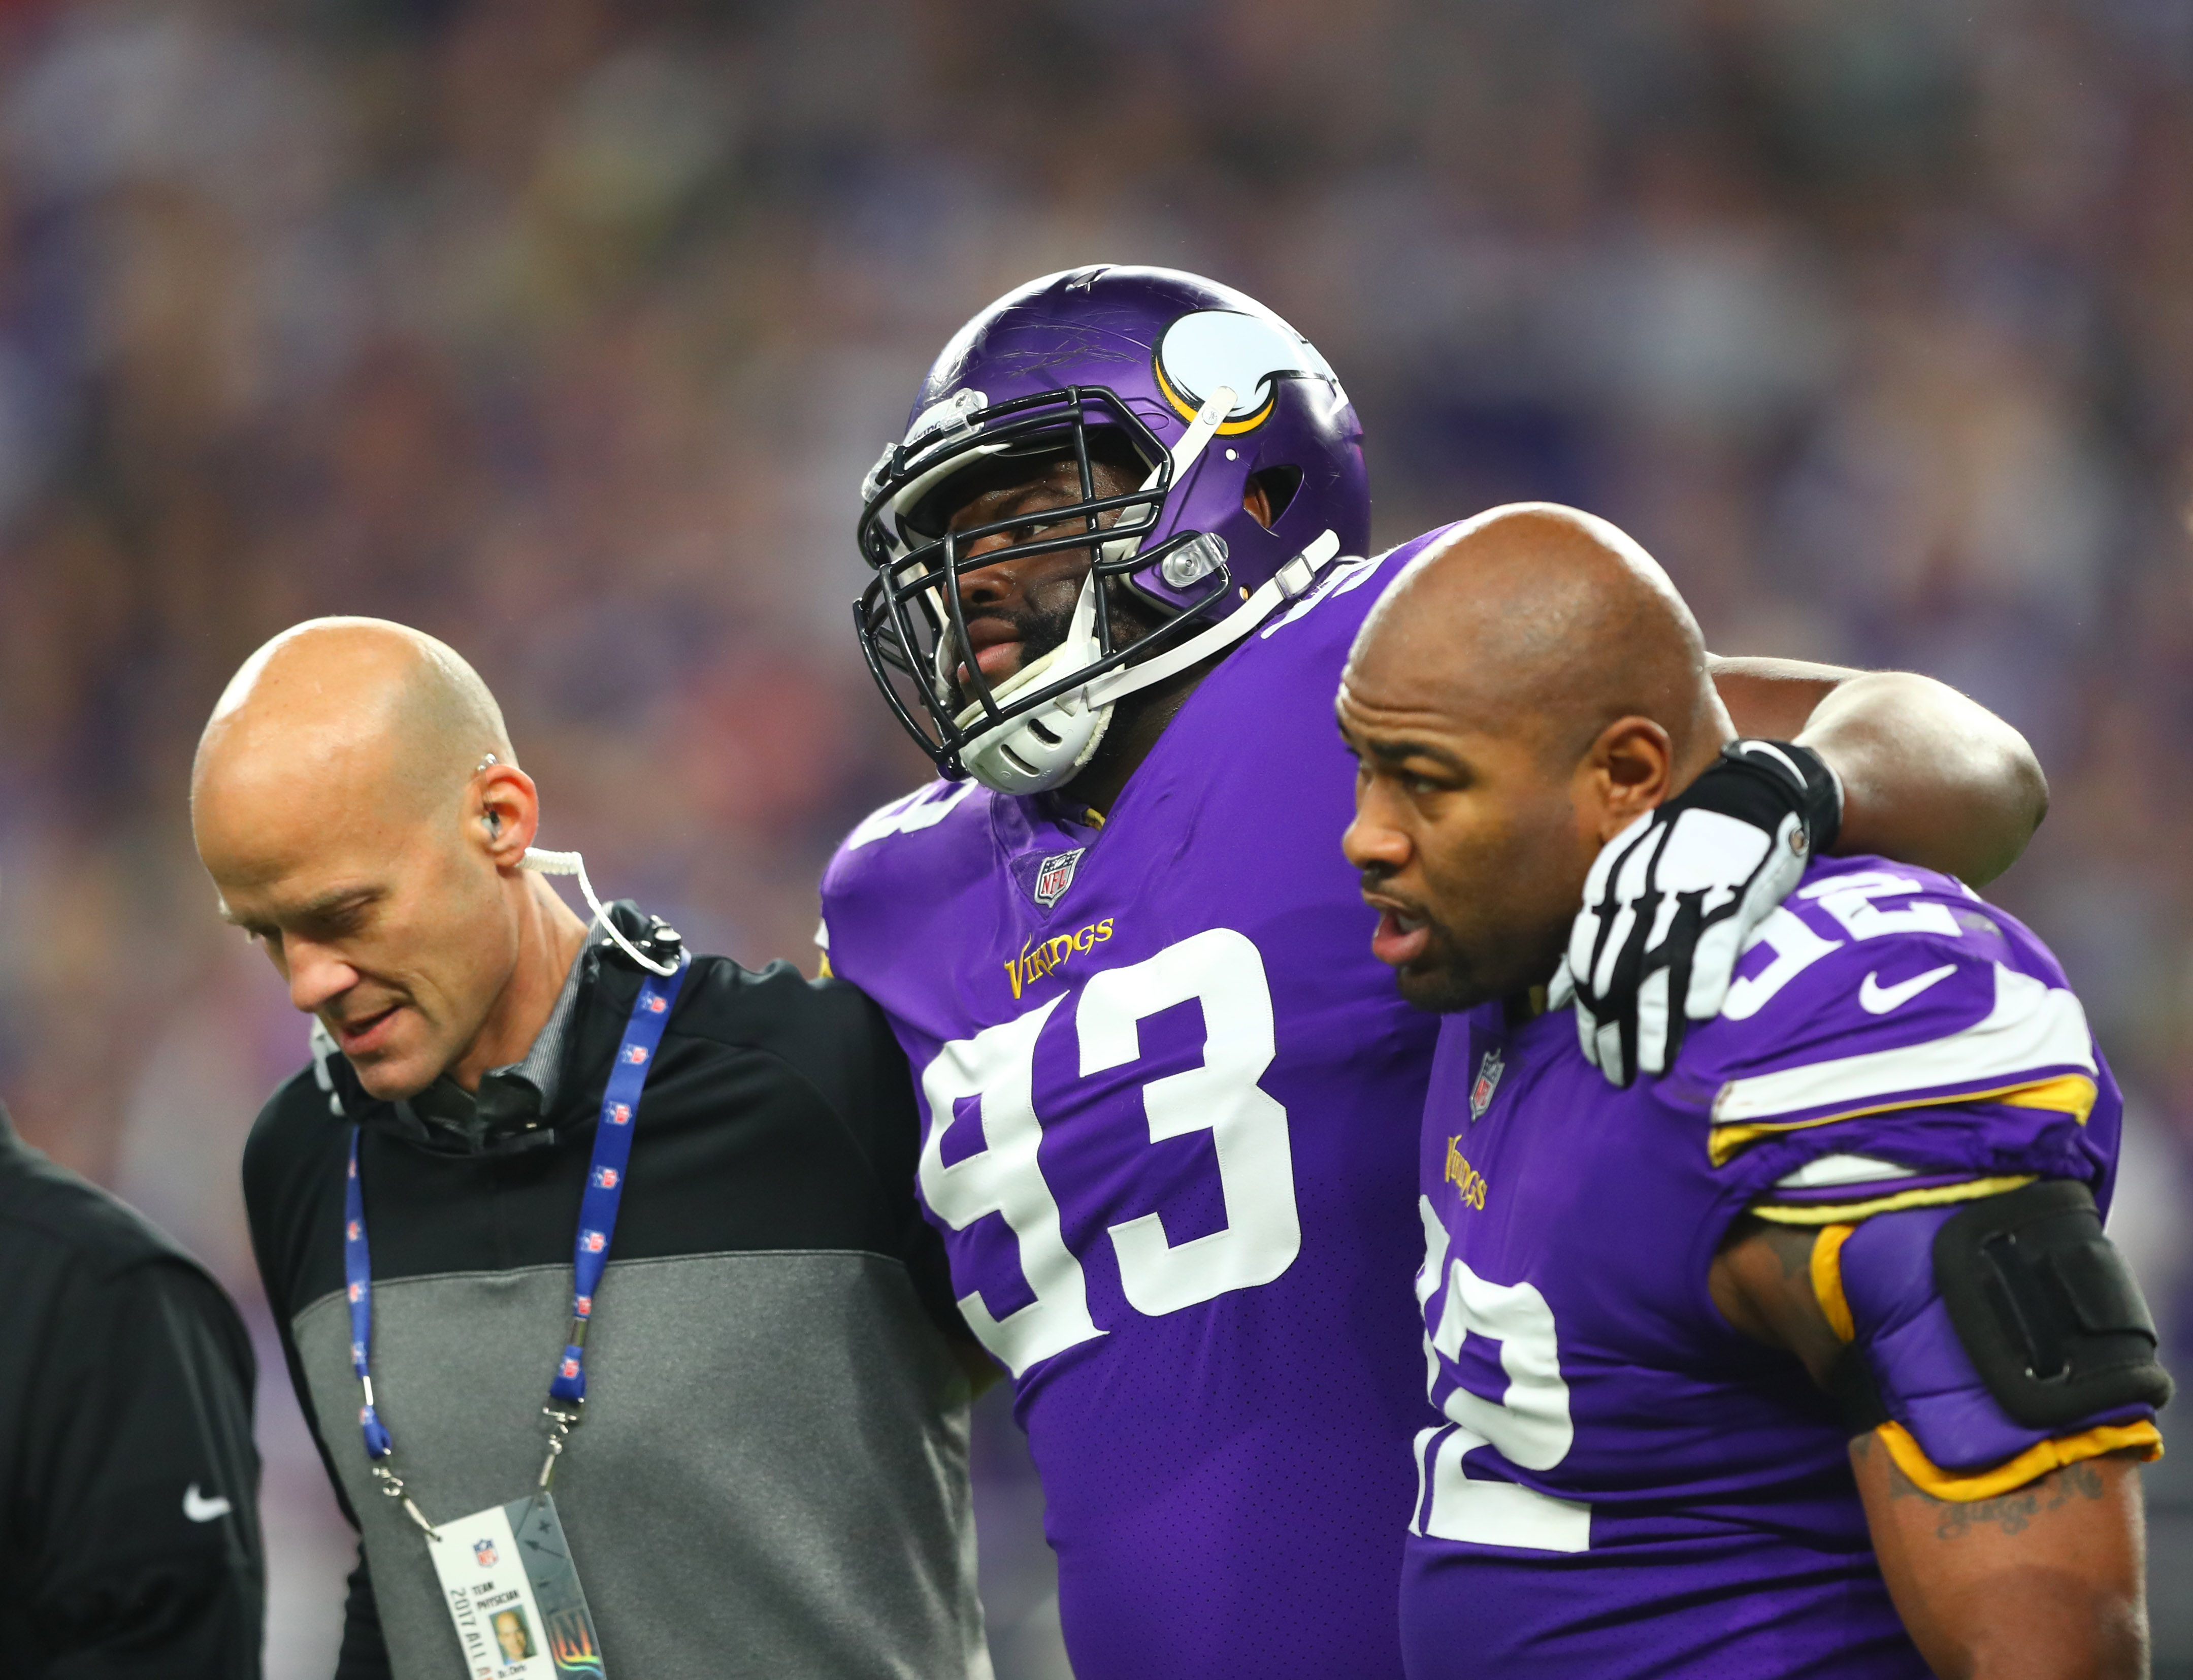 Viking Injuries, and Maybe a Bit of Gamesmanship